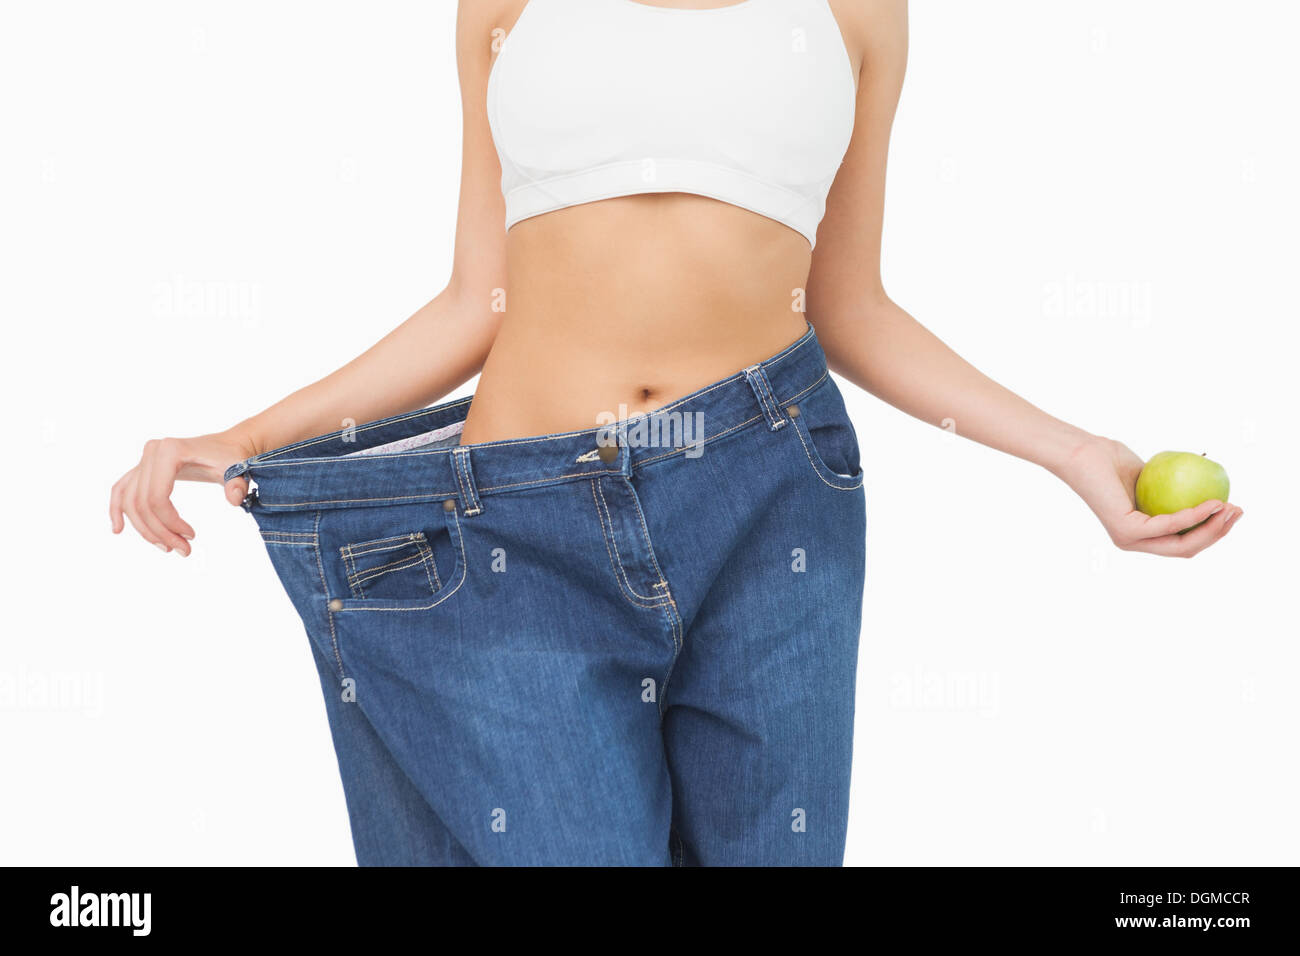 Mid section of slim woman wearing too big jeans holding an apple Stock Photo